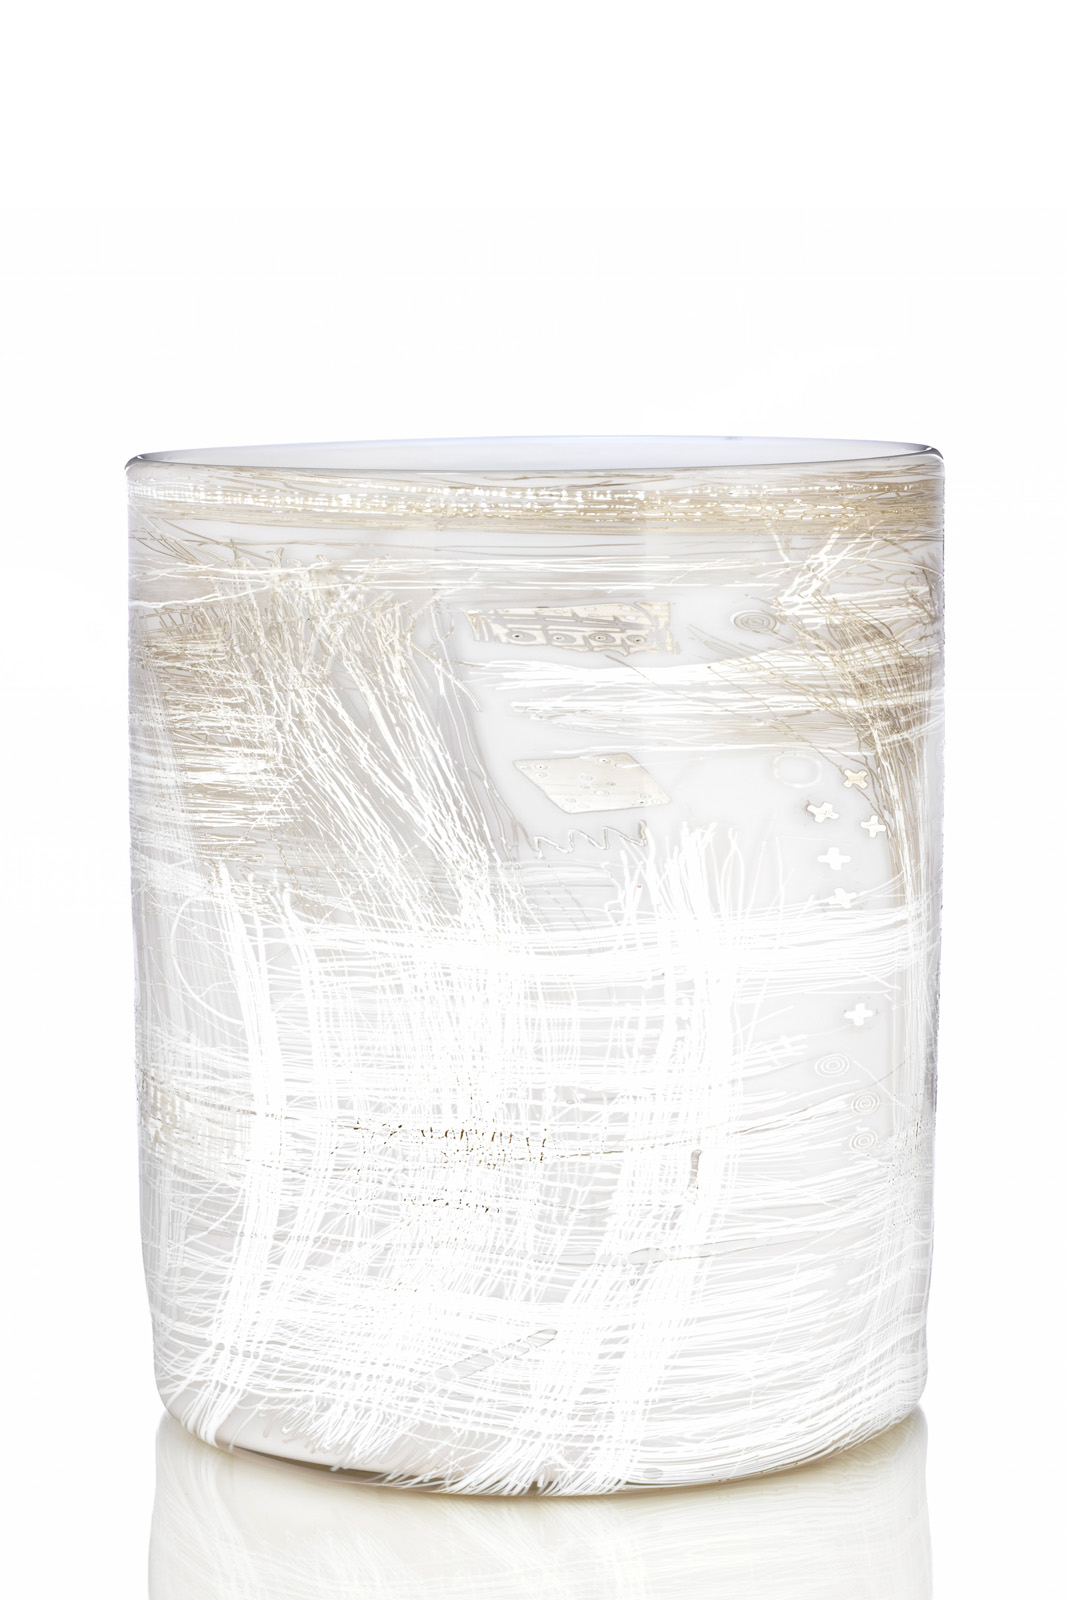 Dale Chihuly, White Cylinder, 2011